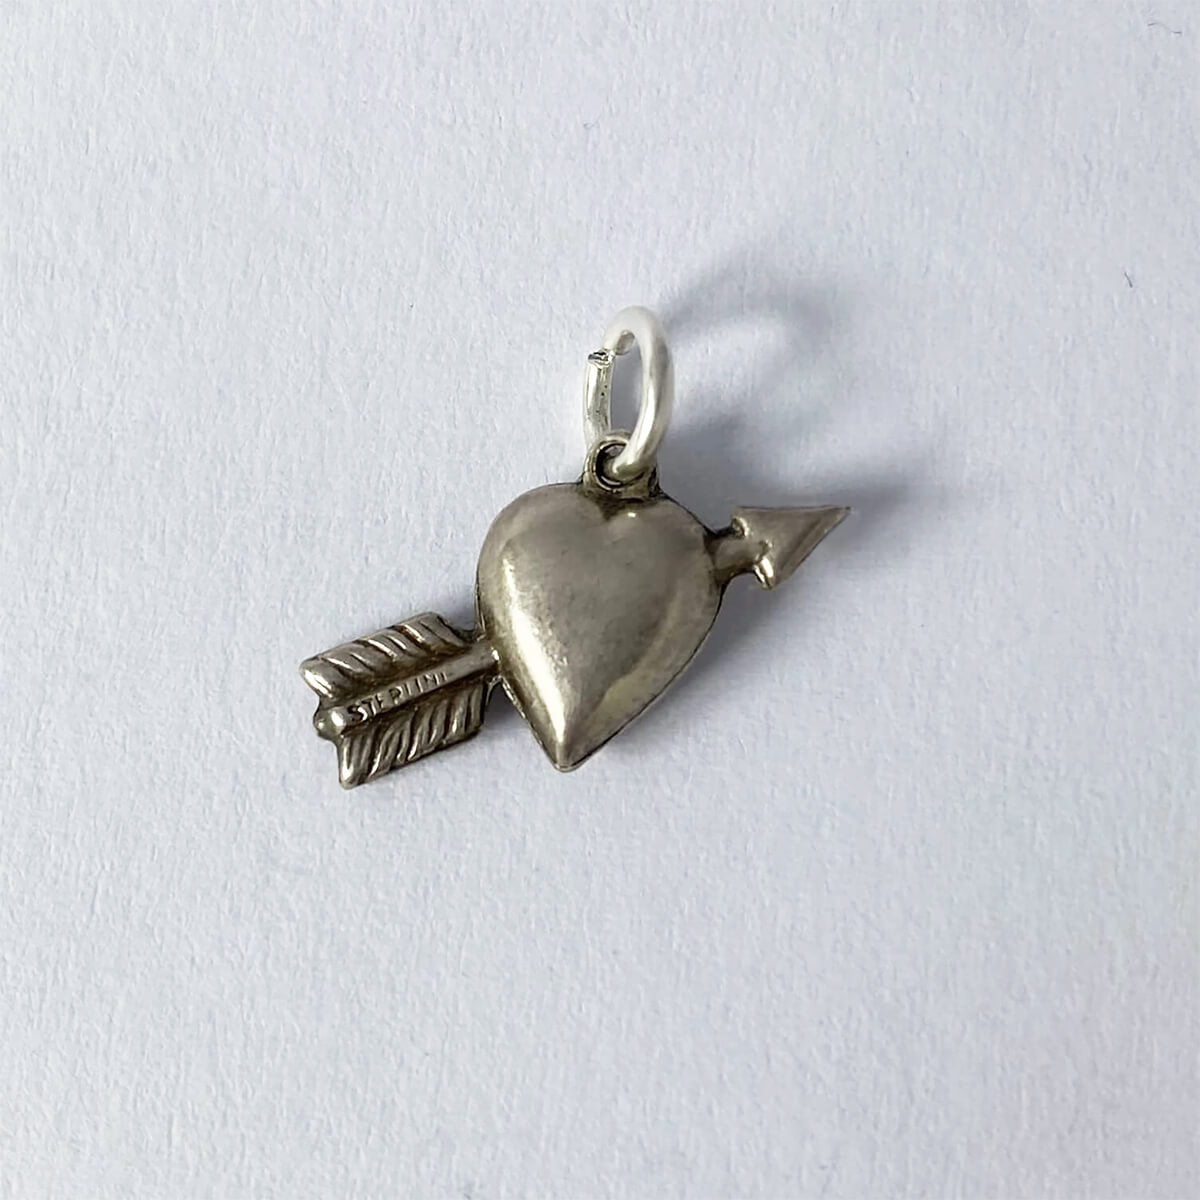 Vintage 1940s sterling silver loveheart and arrow charm from Charmarama